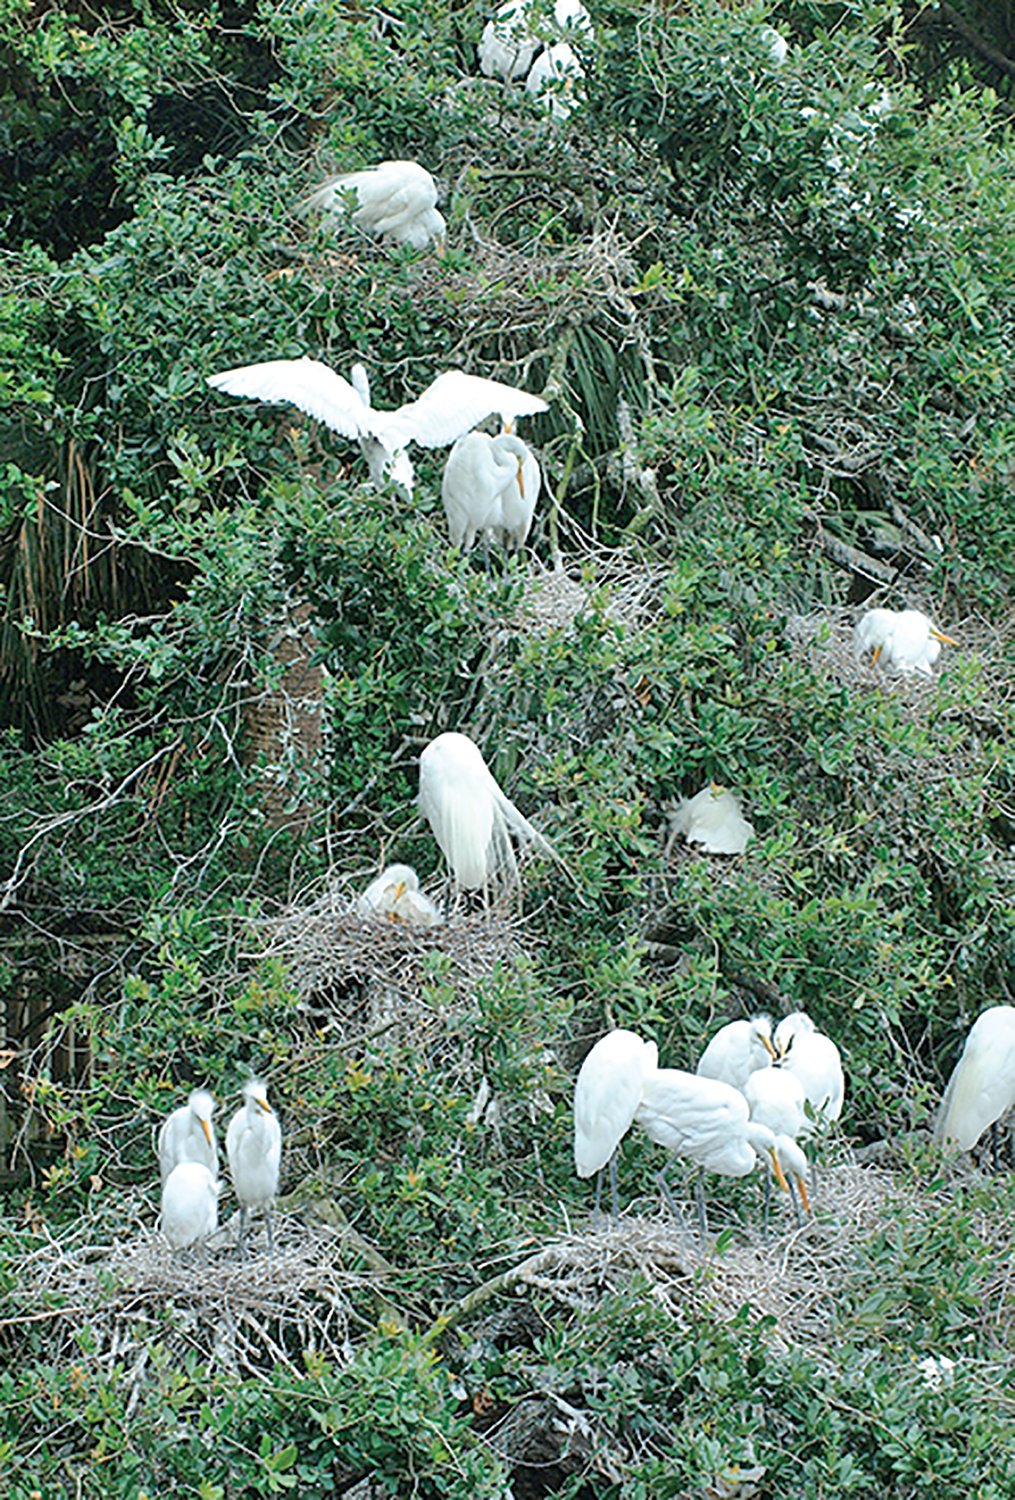 Great egrets tend their nests in trees.